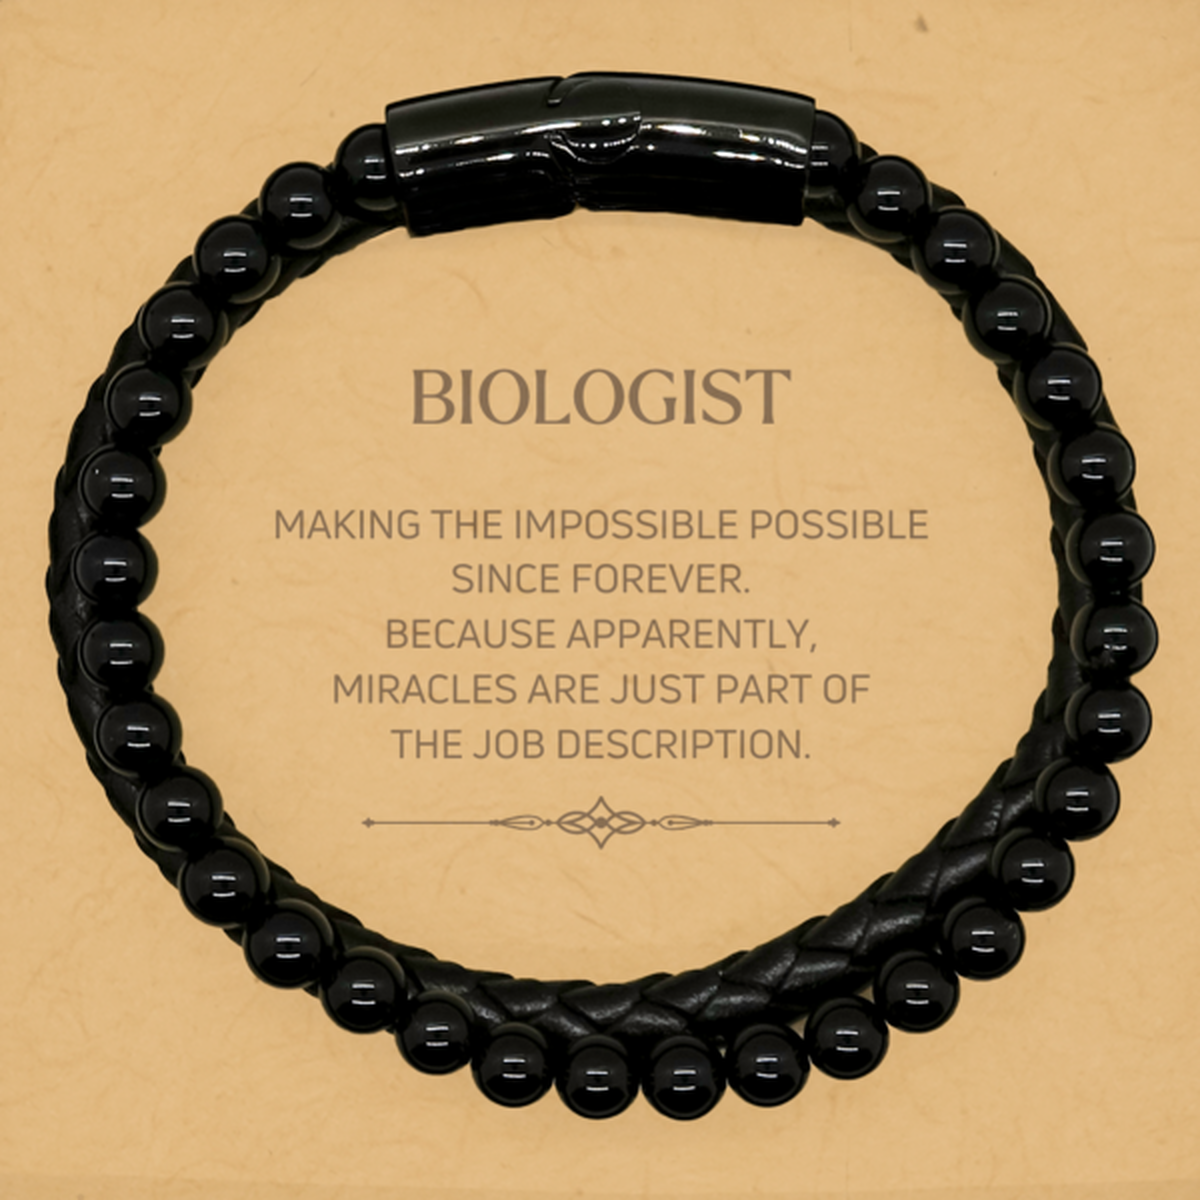 Funny Biologist Gifts, Miracles are just part of the job description, Inspirational Birthday Stone Leather Bracelets For Biologist, Men, Women, Coworkers, Friends, Boss